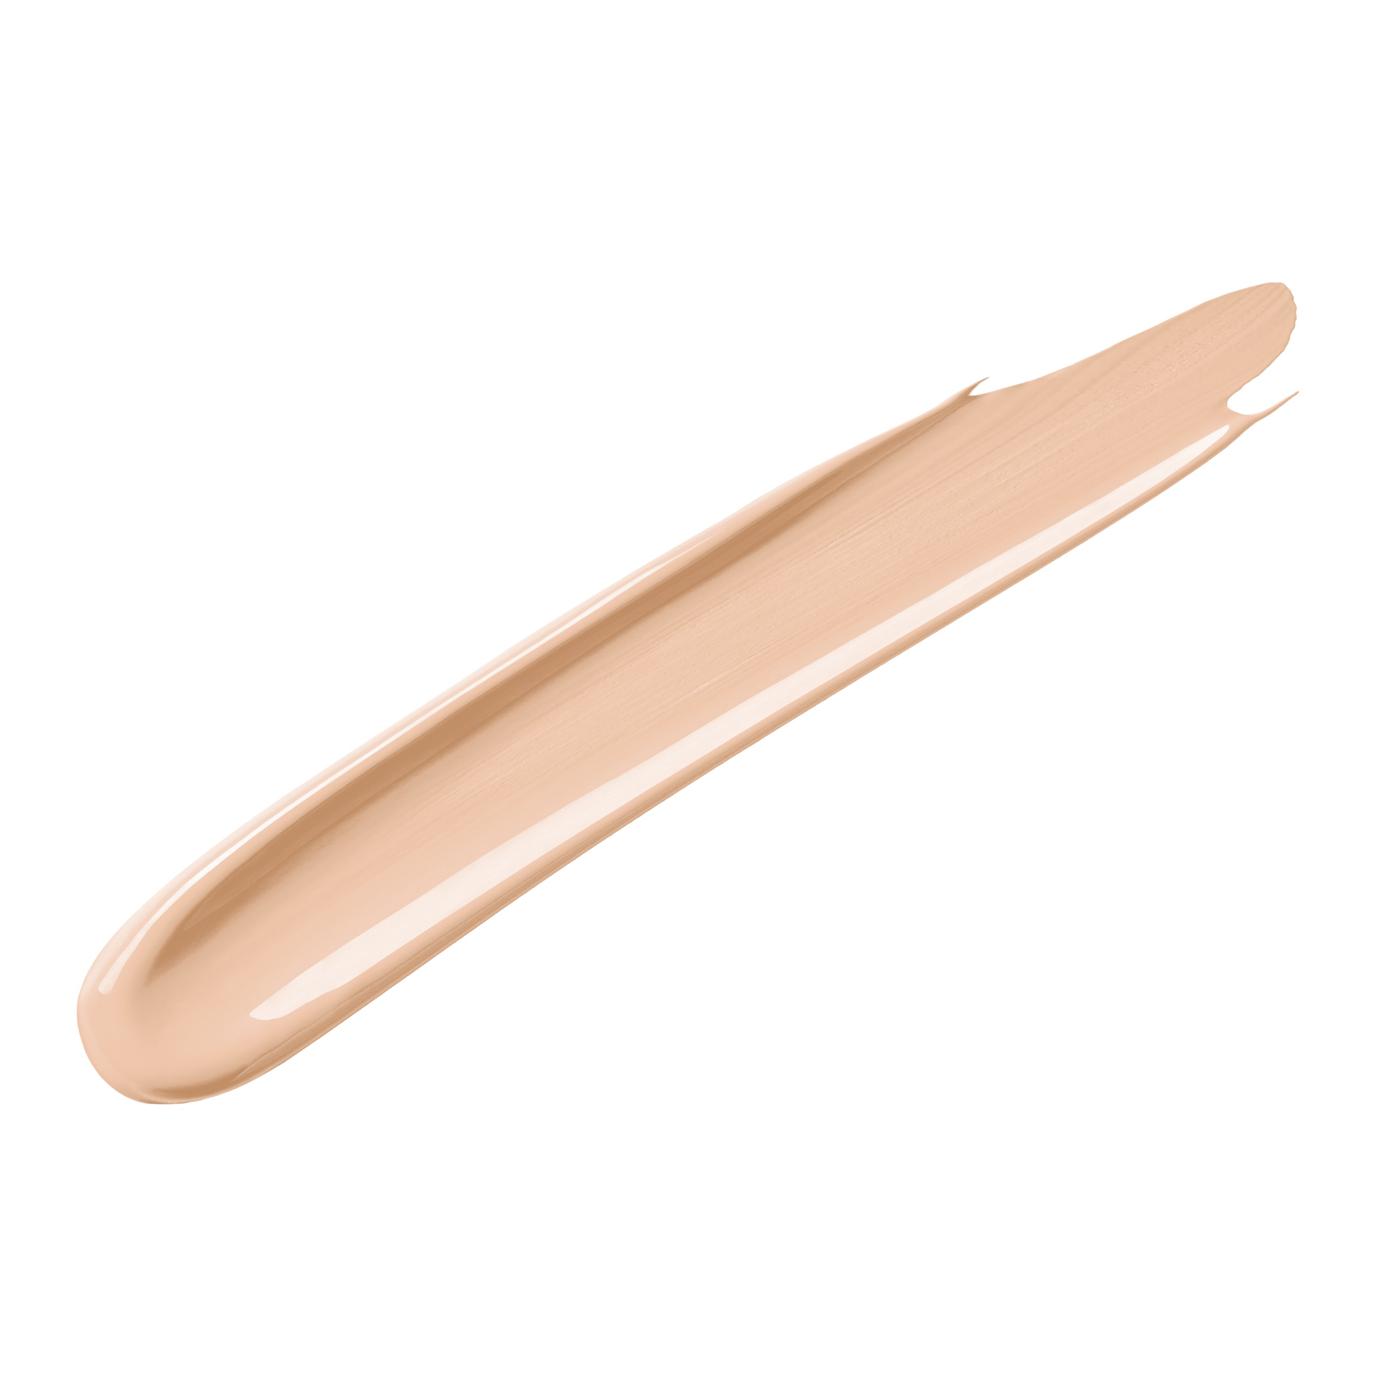 Covergirl Clean Invisible Concealer - Light Beige; image 7 of 15